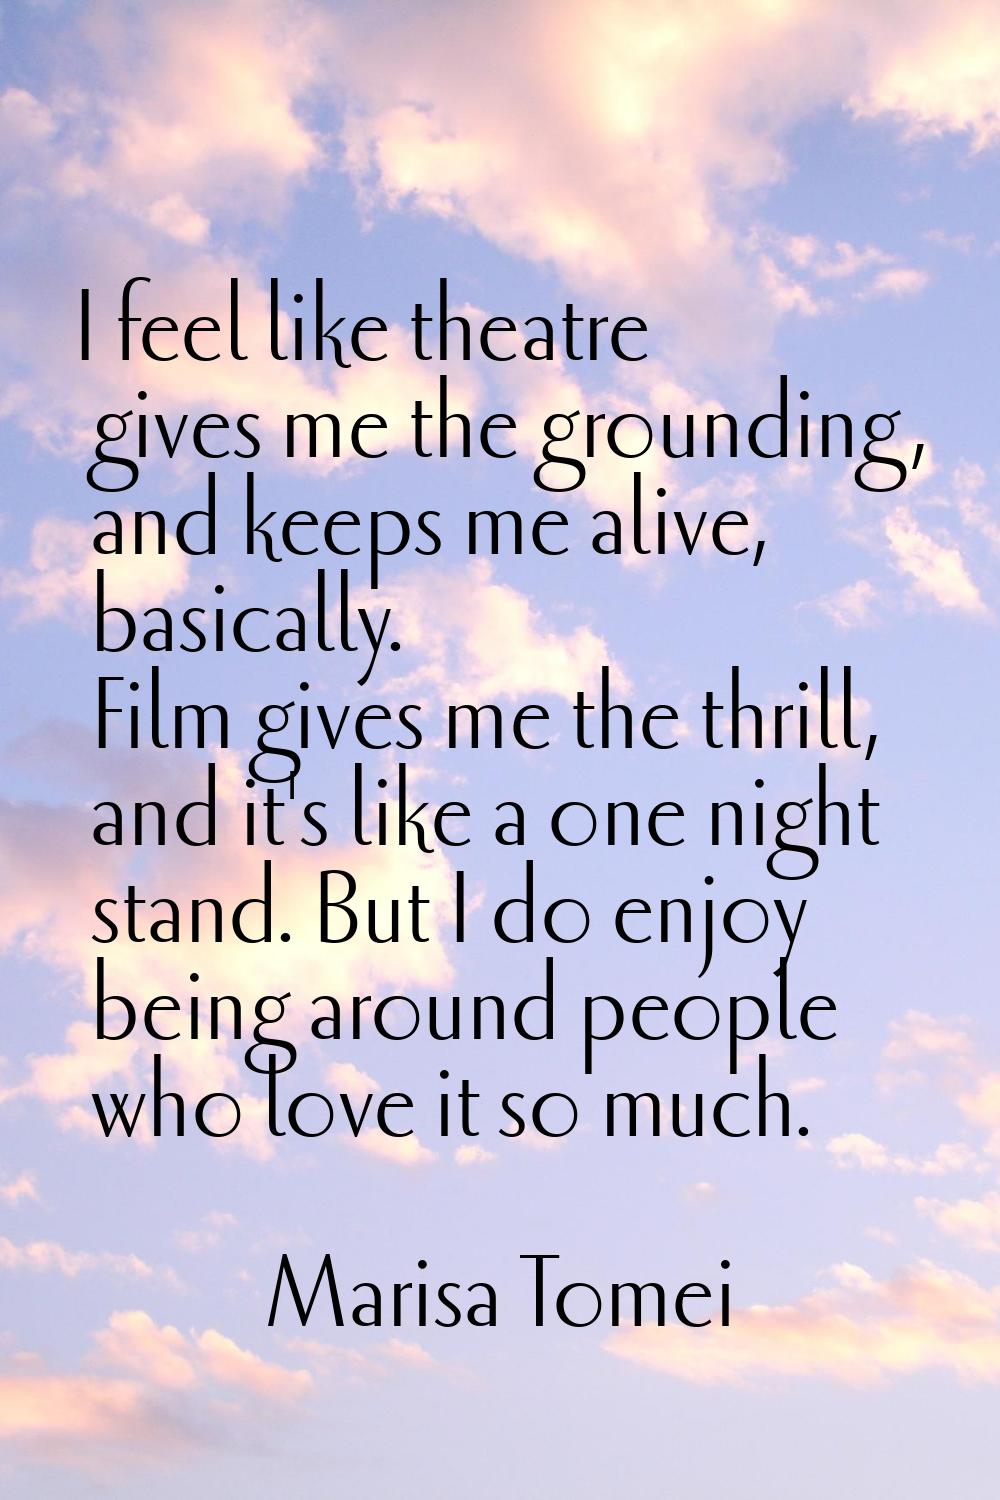 I feel like theatre gives me the grounding, and keeps me alive, basically. Film gives me the thrill